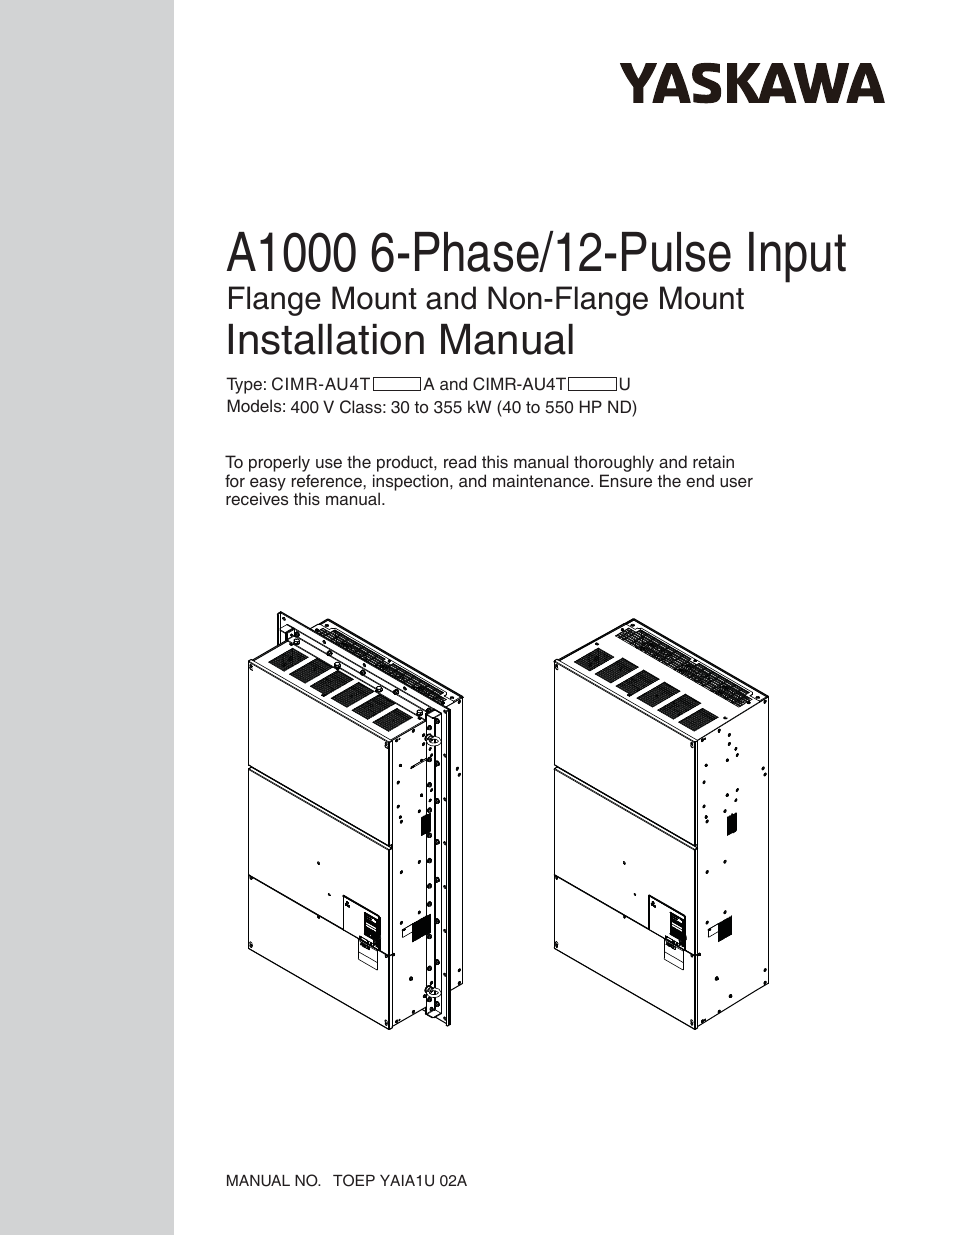 A1000 6-Phase/12-Pulse Input